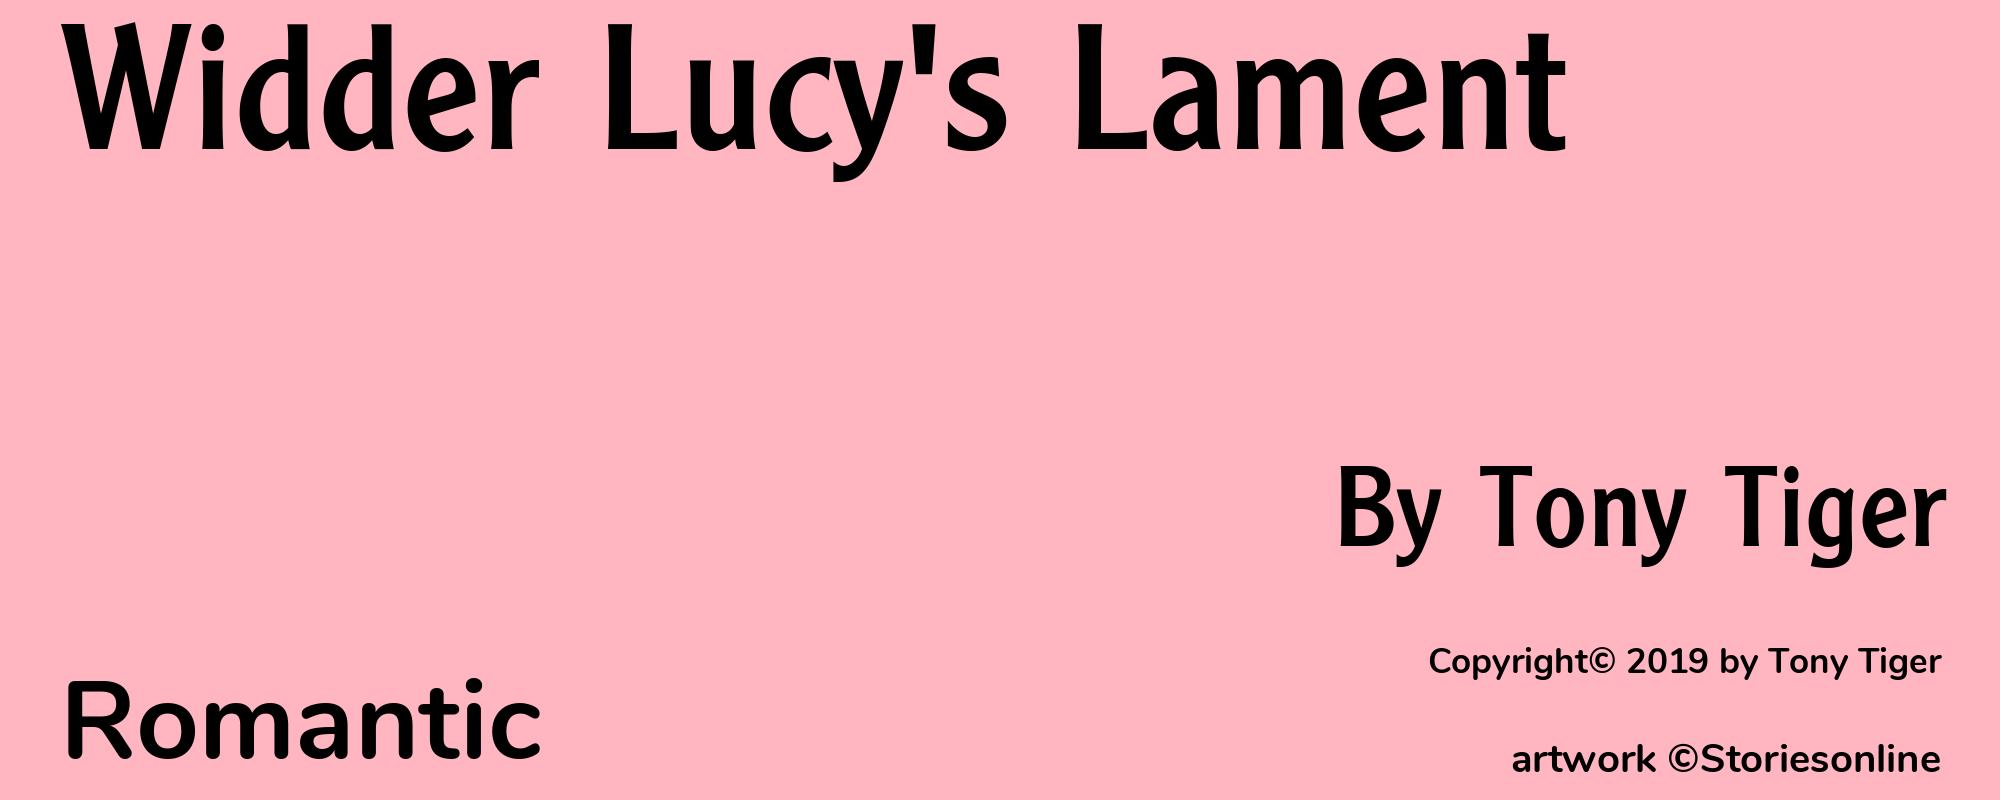 Widder Lucy's Lament - Cover